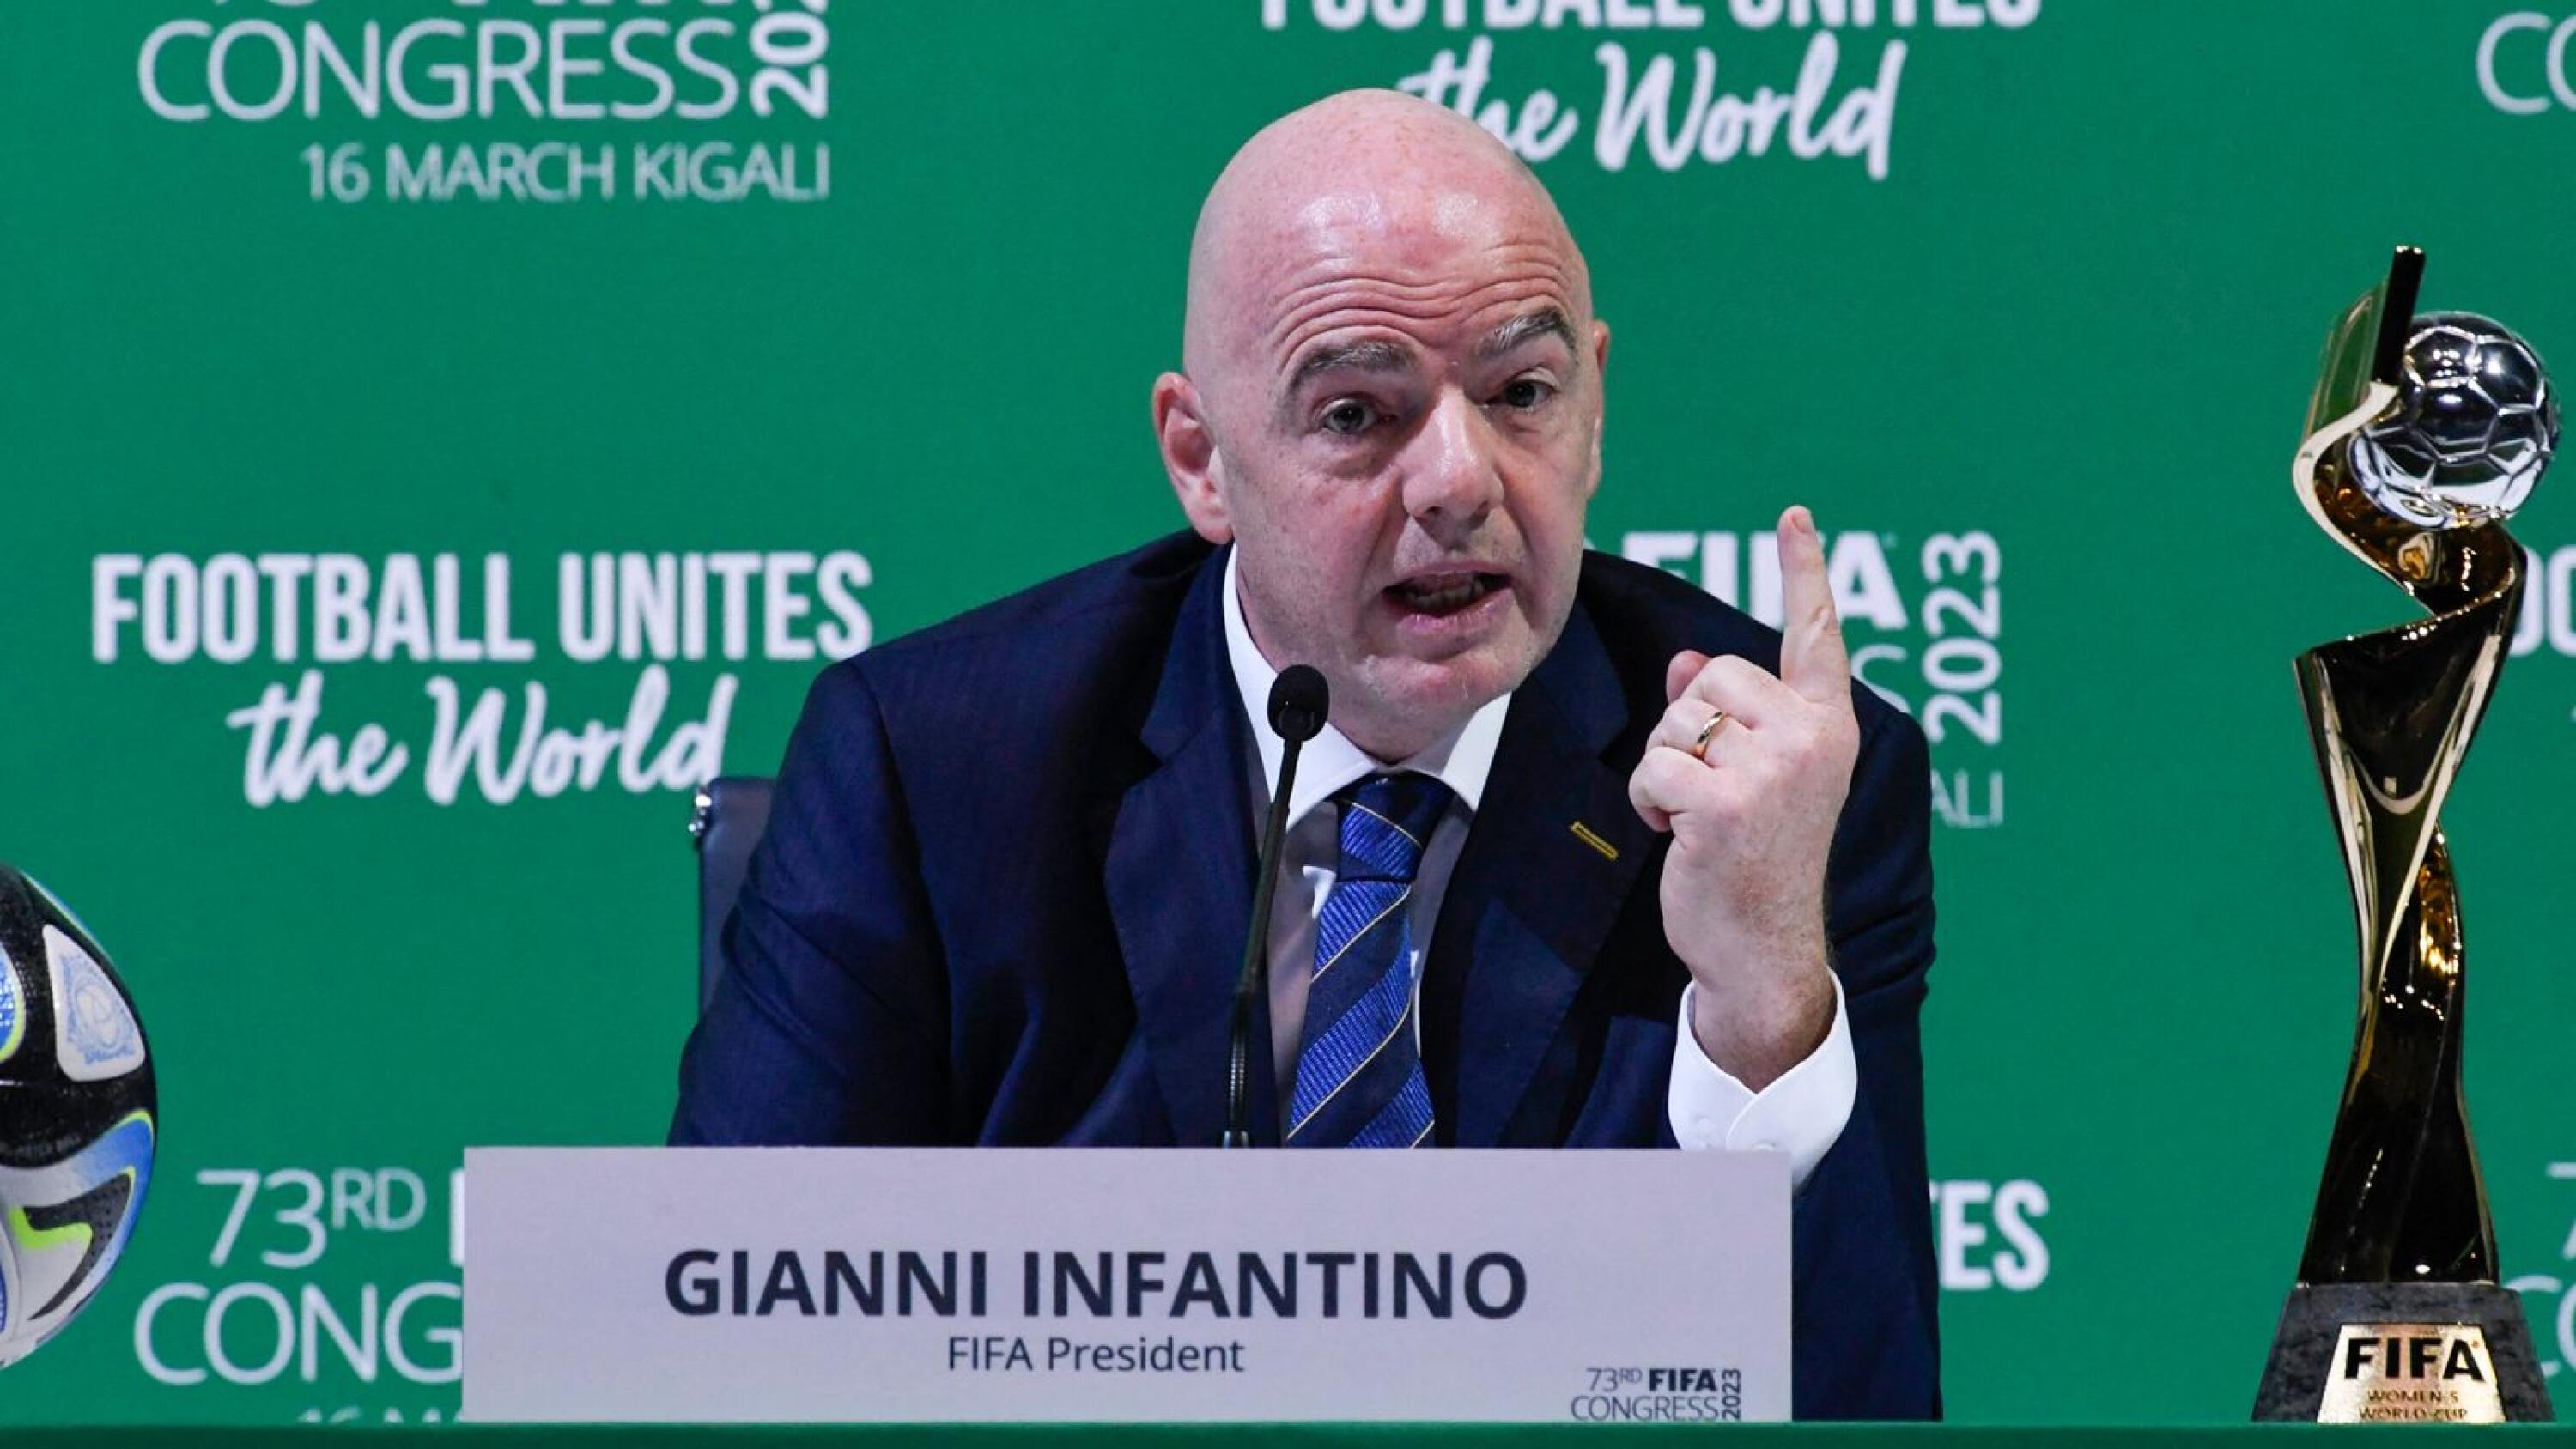 Fifa President Gianni Infantino gestures during a press conference at the 73rd Fifa Congress in Kigali, Rwanda, on Thursday